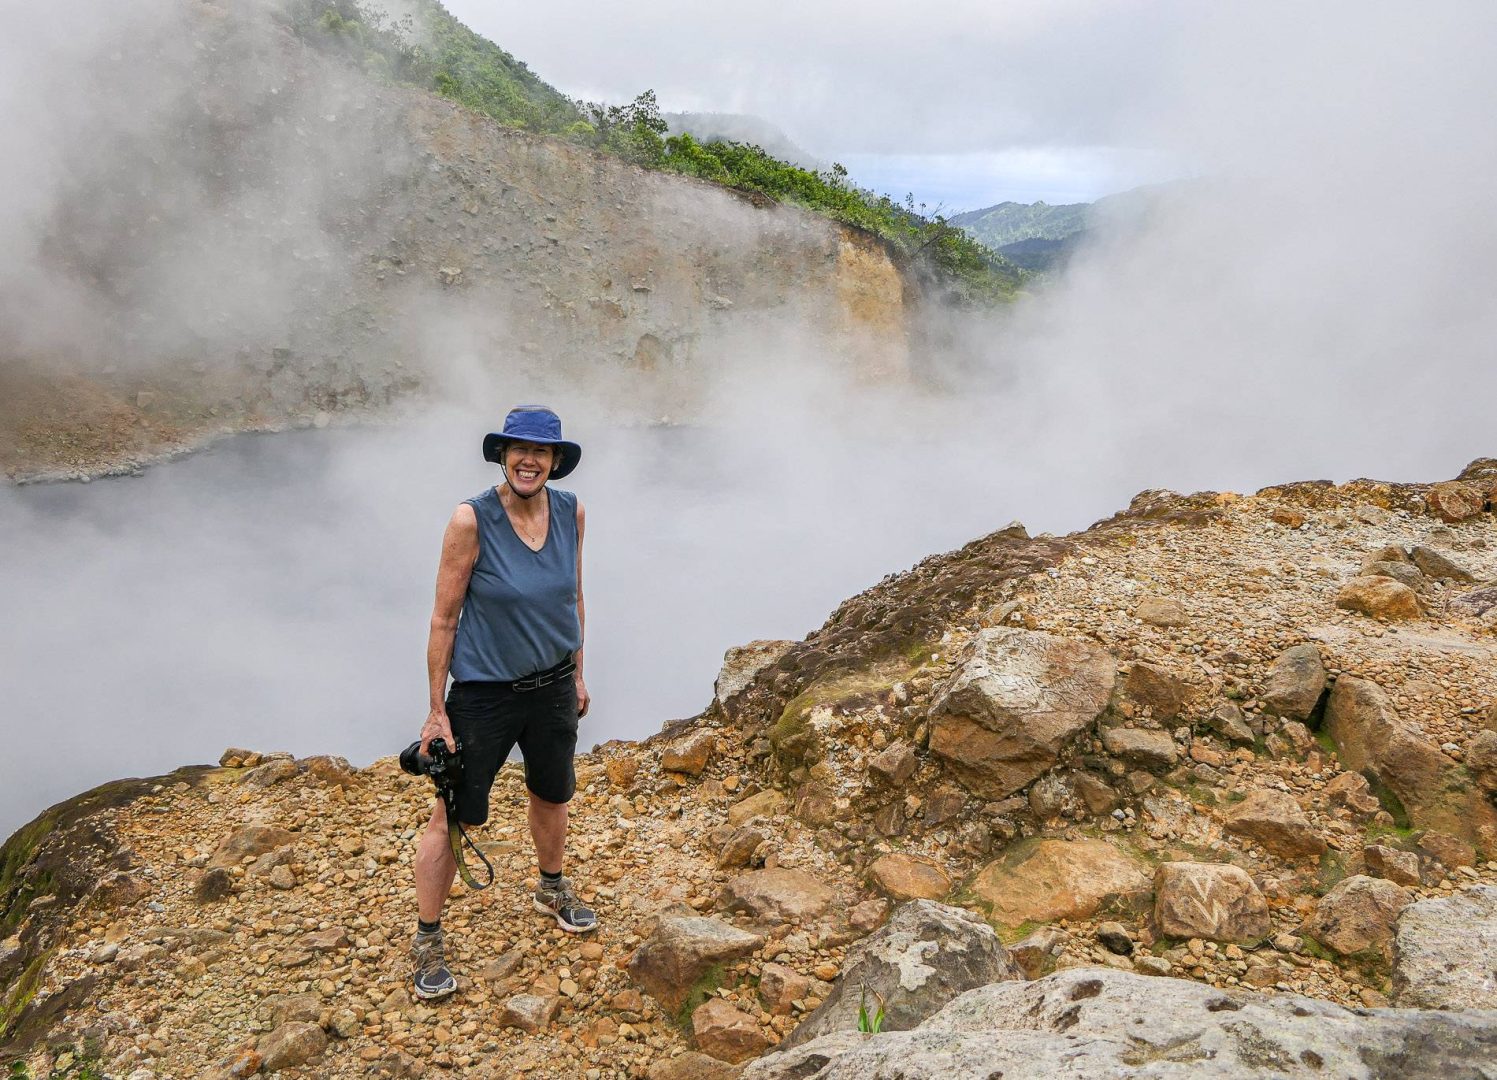 Me at the edge of Boiling Lake in Dominica